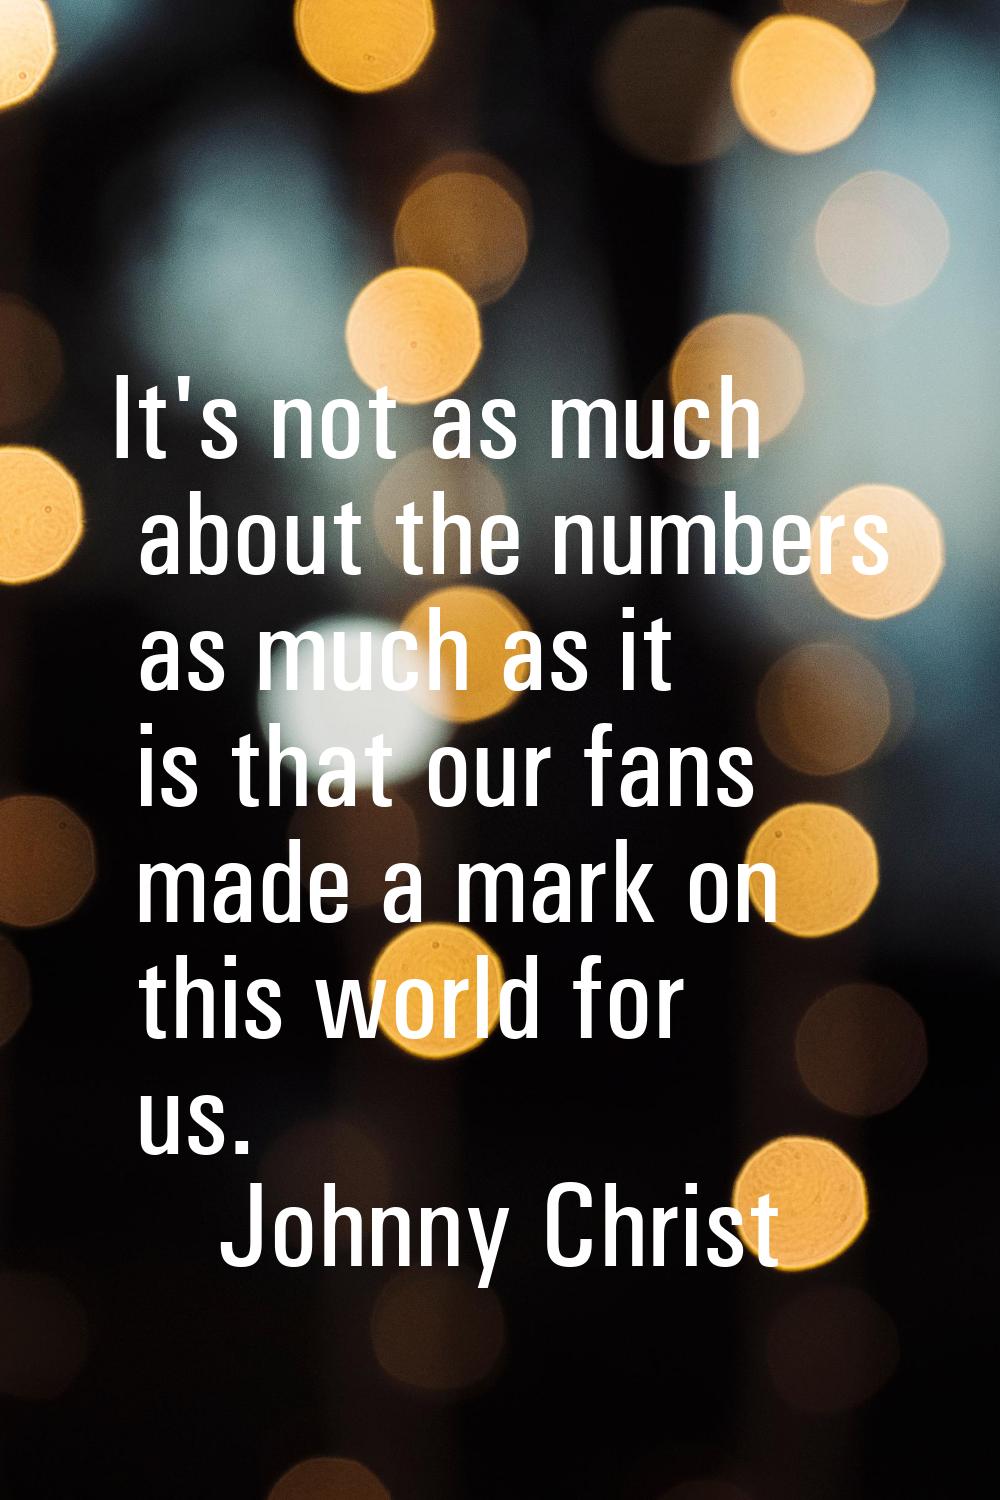 It's not as much about the numbers as much as it is that our fans made a mark on this world for us.